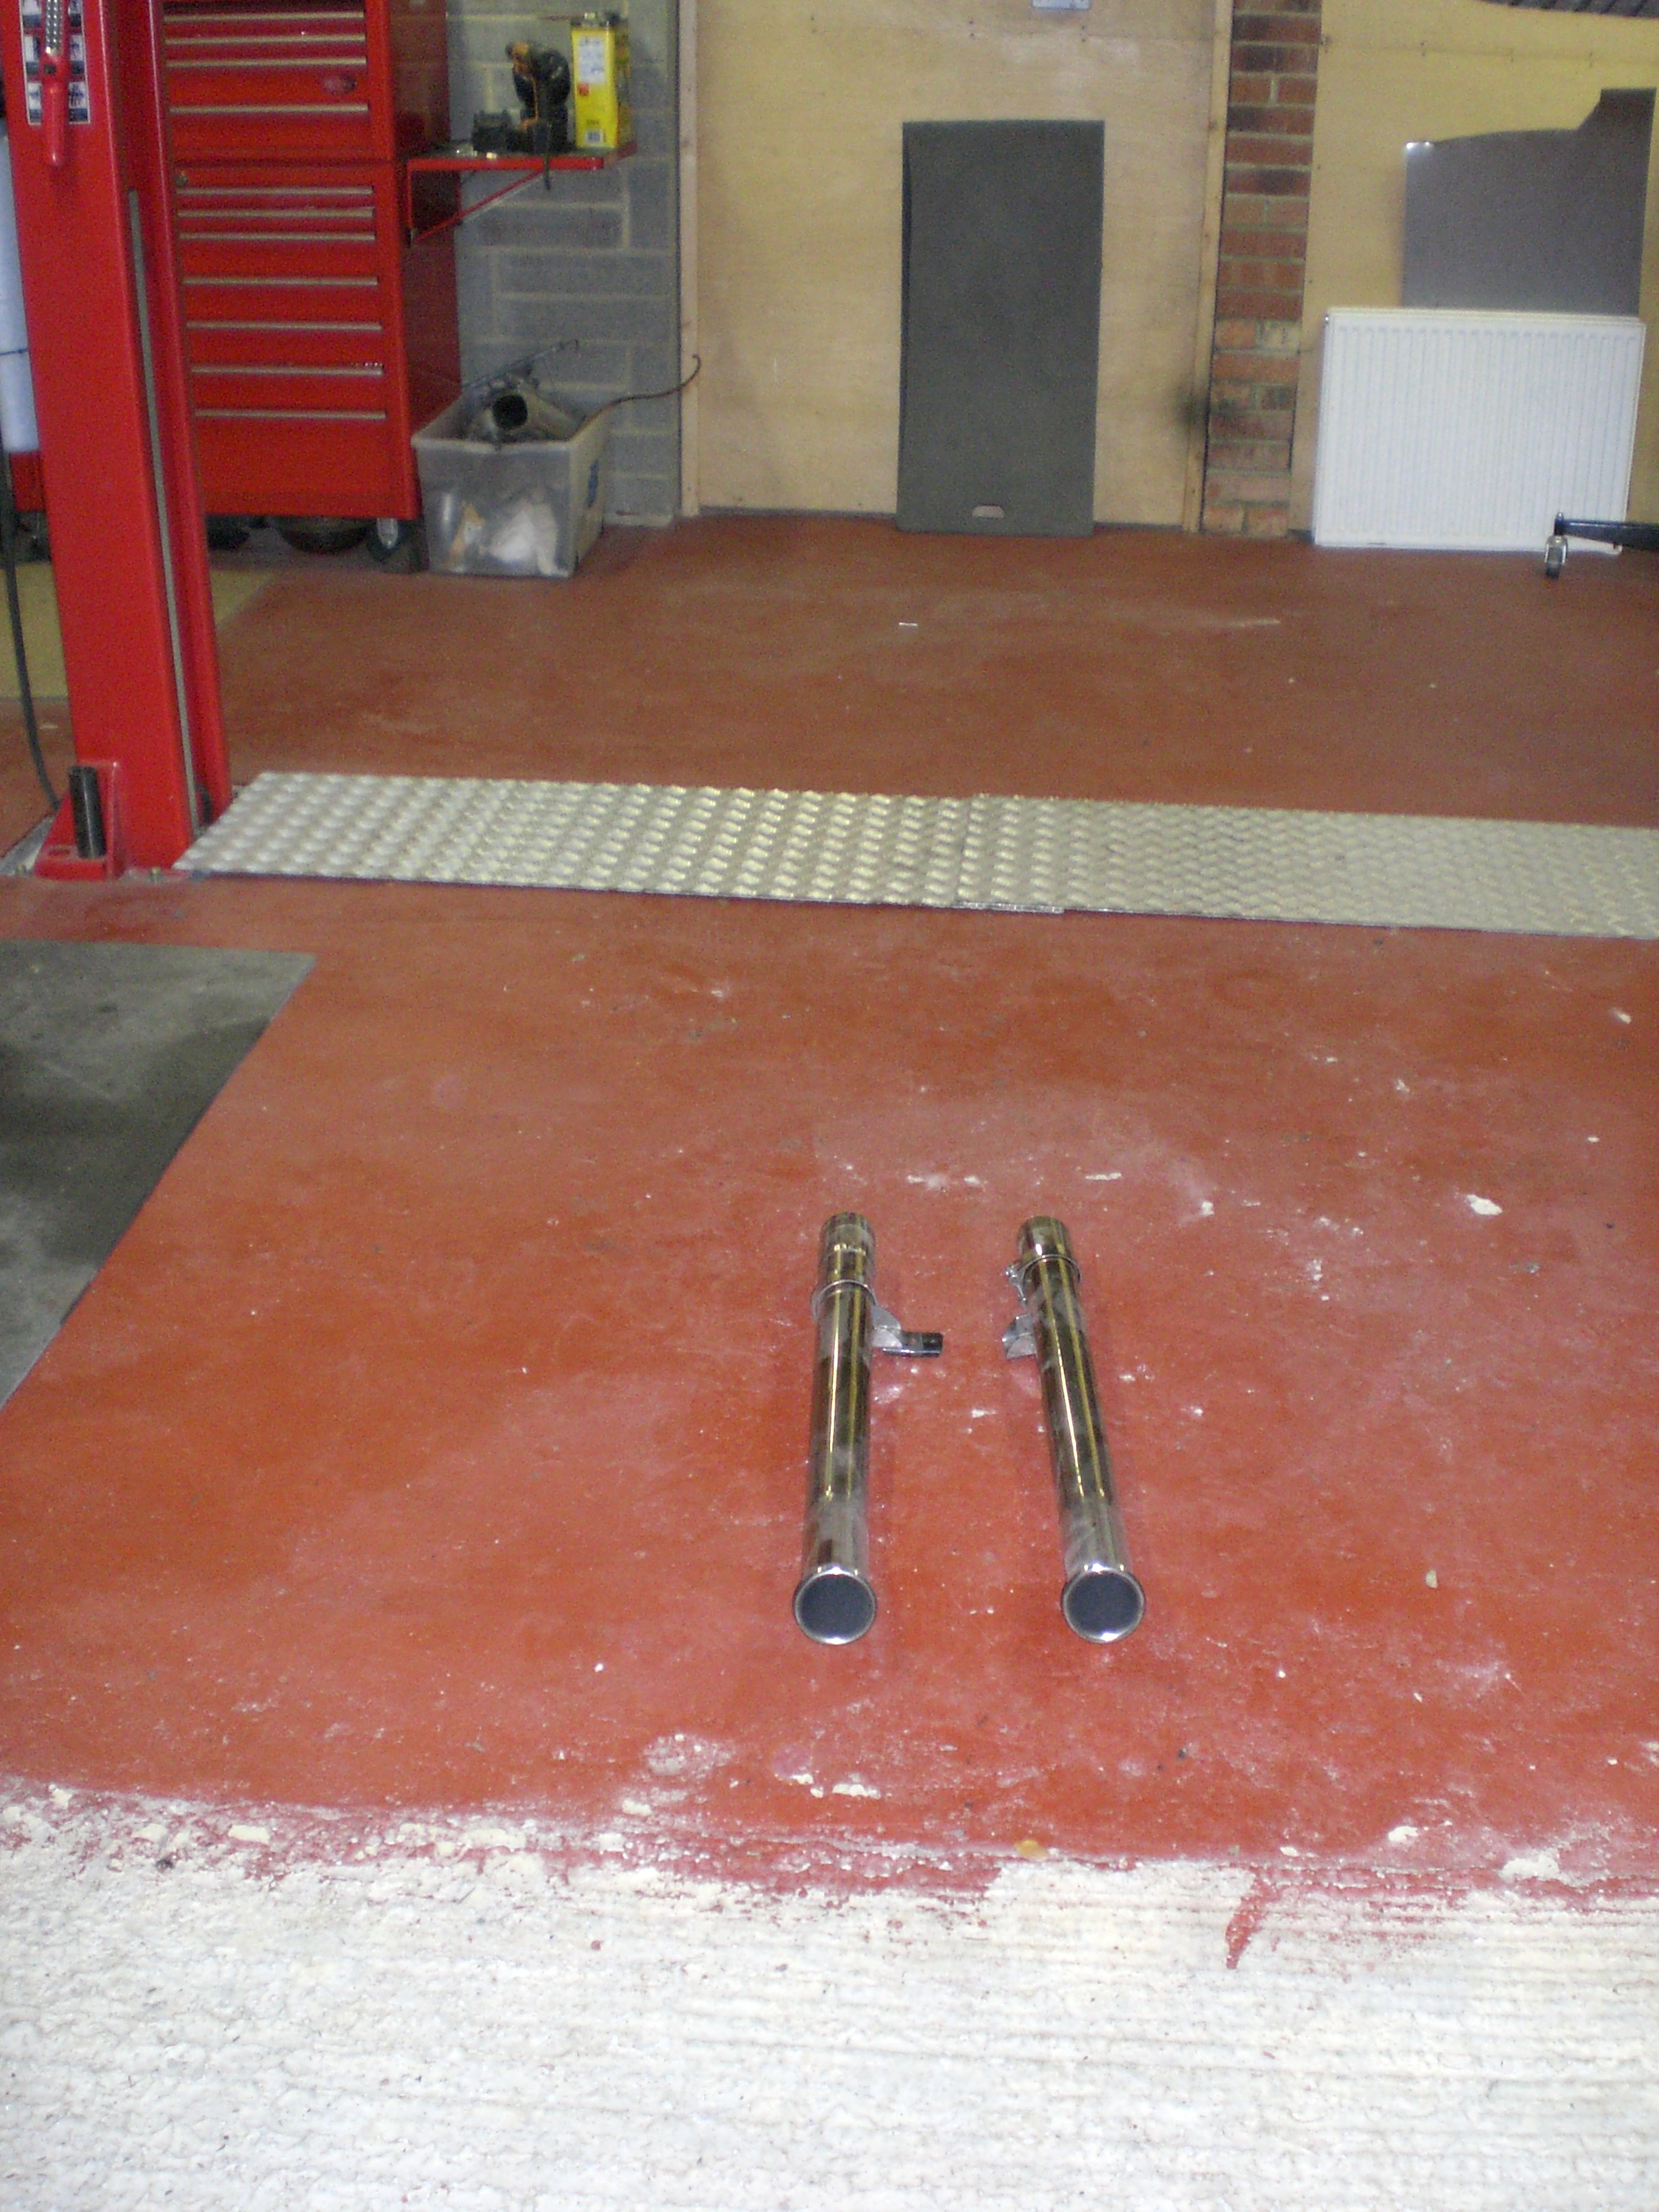 Modification to car ramp - need structural calculations - Page 1 - Homes, Gardens and DIY - PistonHeads